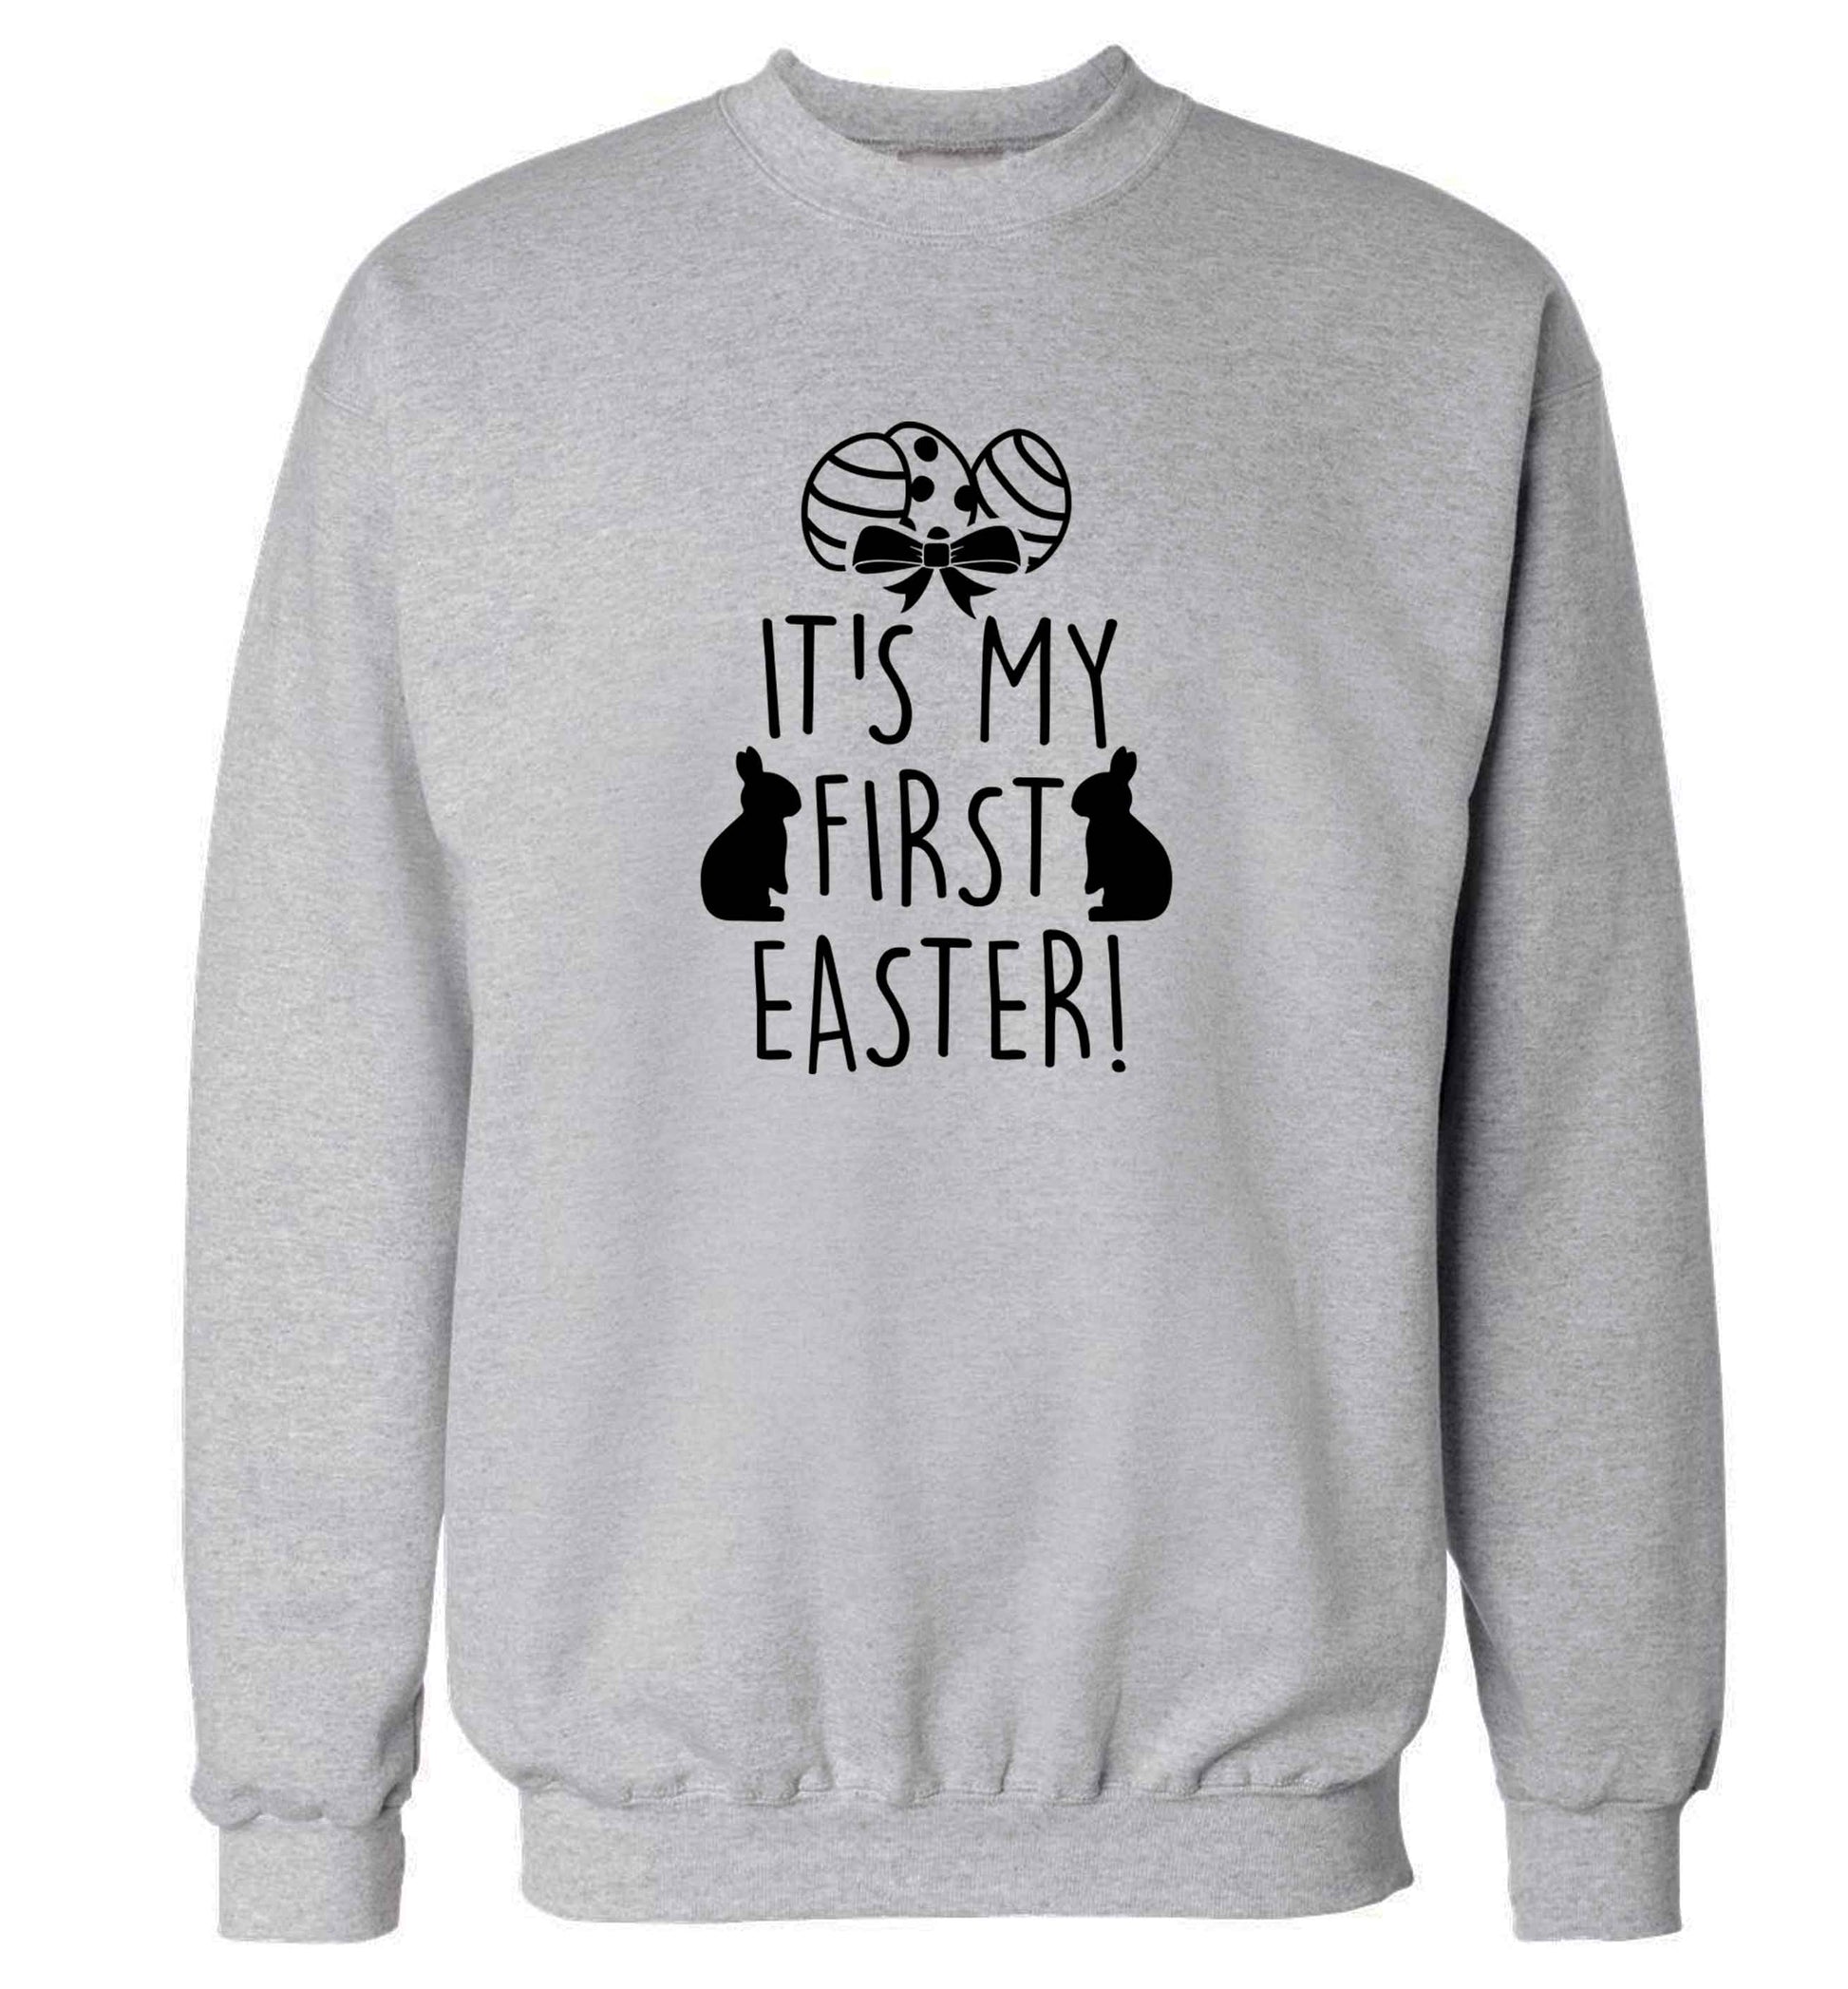 It's my first Easter adult's unisex grey sweater 2XL